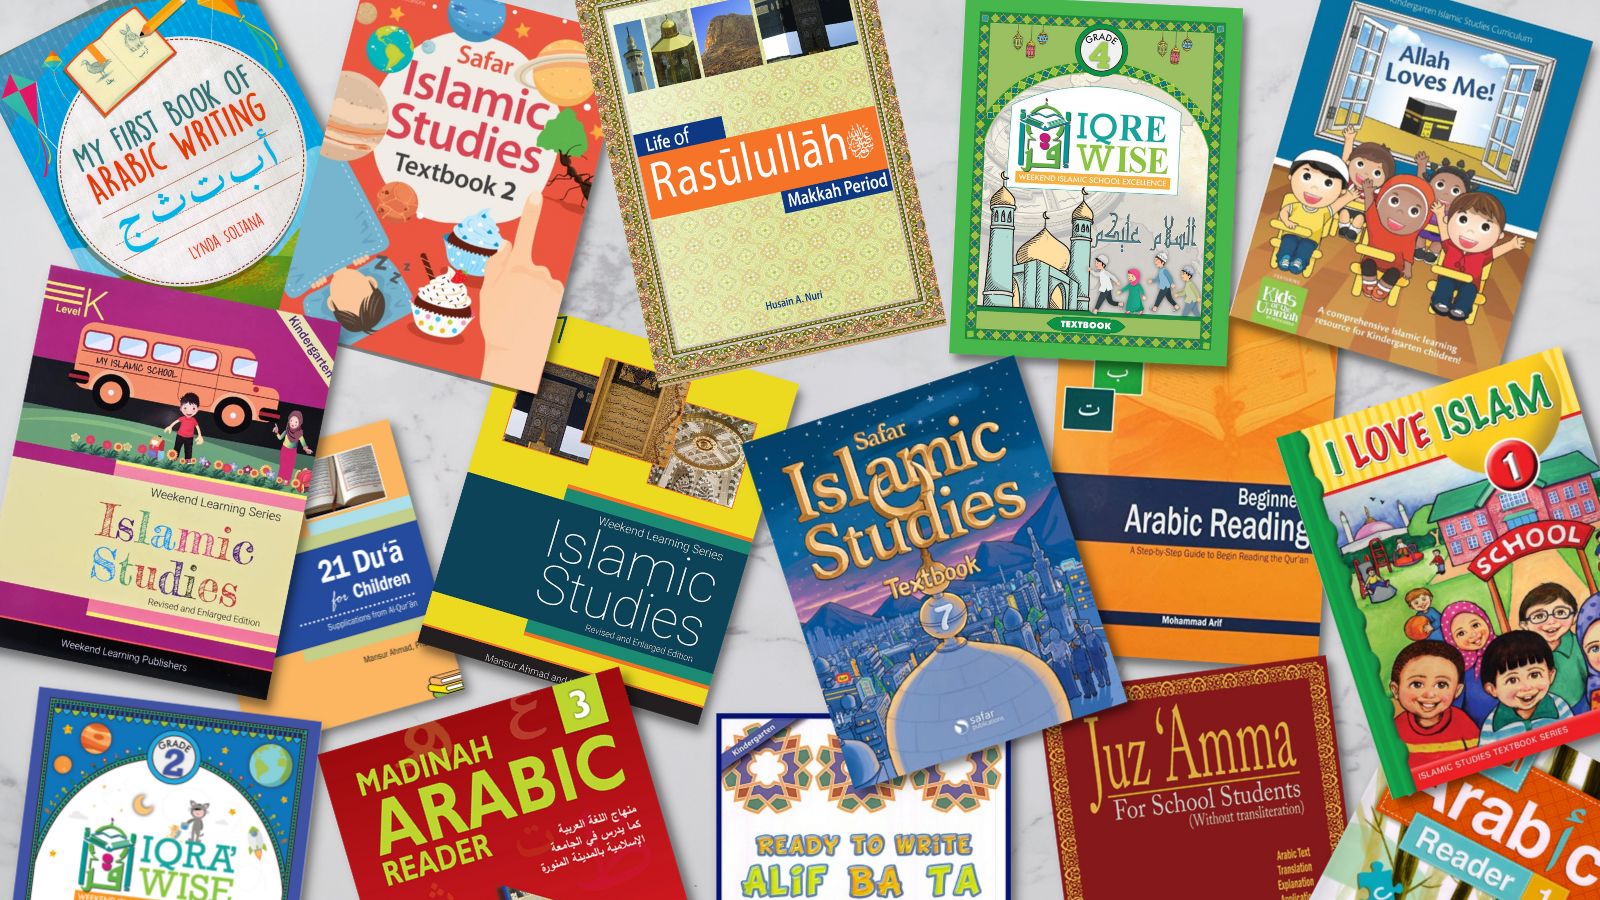 Islamic Studies and Arabic Curriculum Books - I Love Islam, Weekend Learning, Safar Publications and IQRA WISE Series